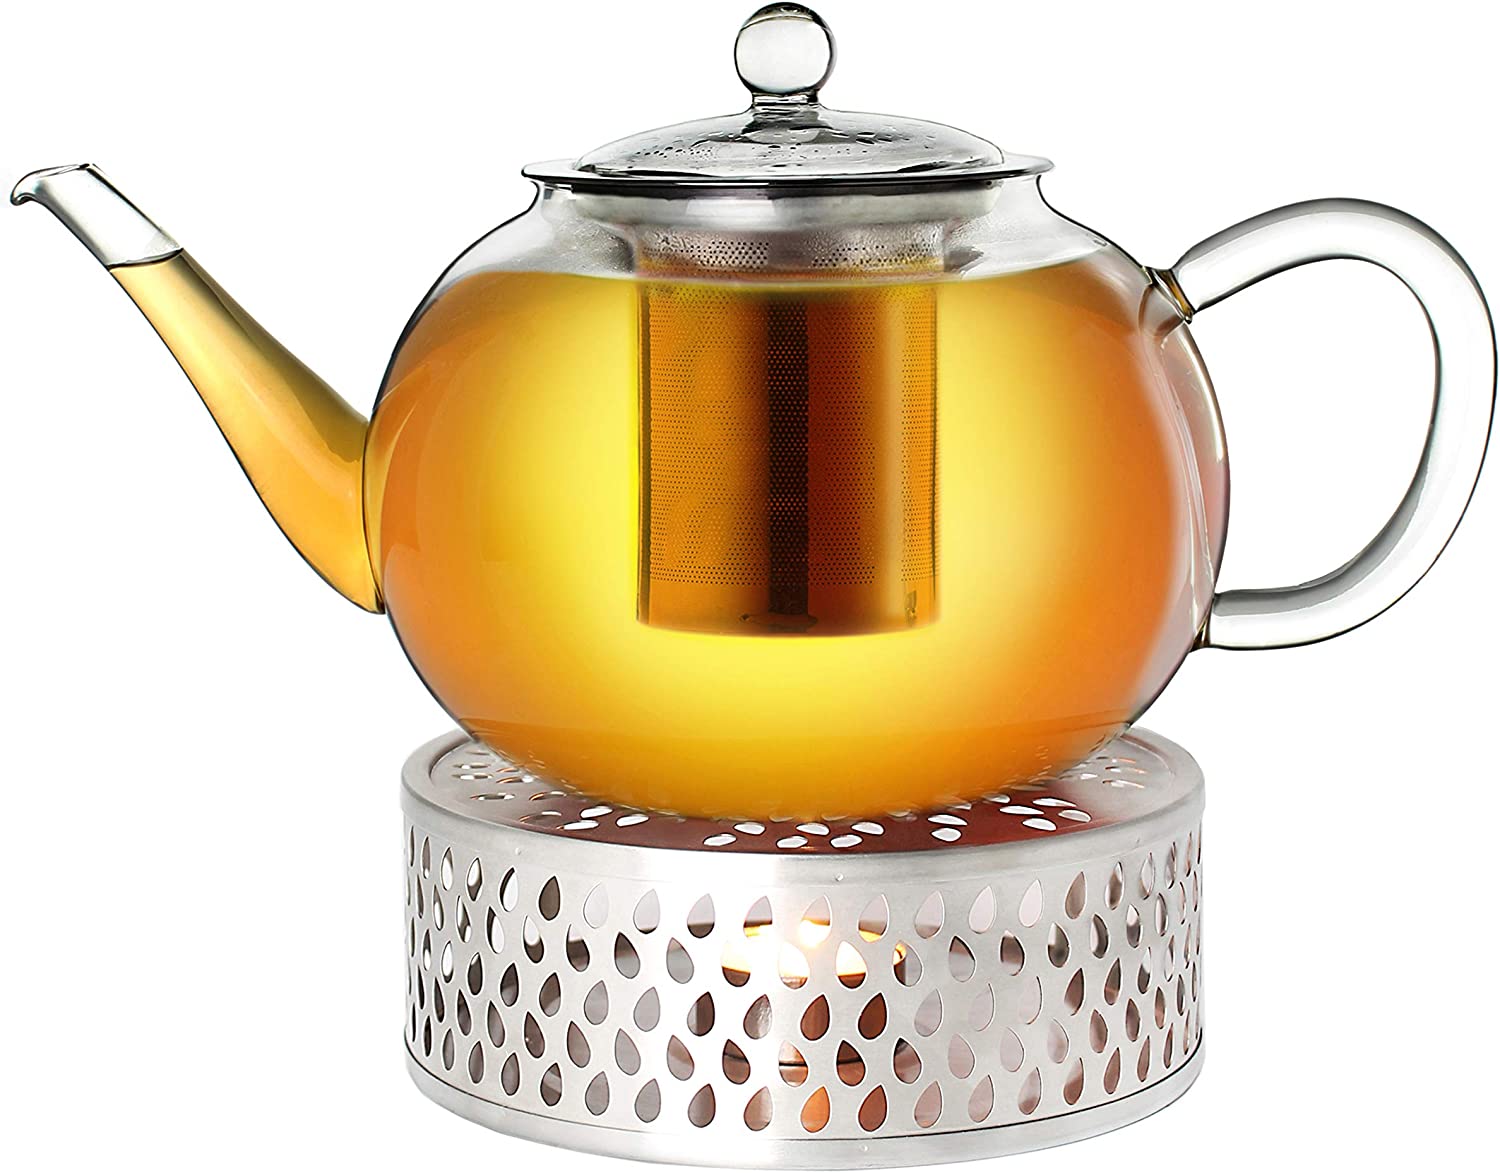 Creano Glass Teapot 800 ml 3-Part Tea Maker with Integrated Stainless Steel Strainer and Glass Lid.